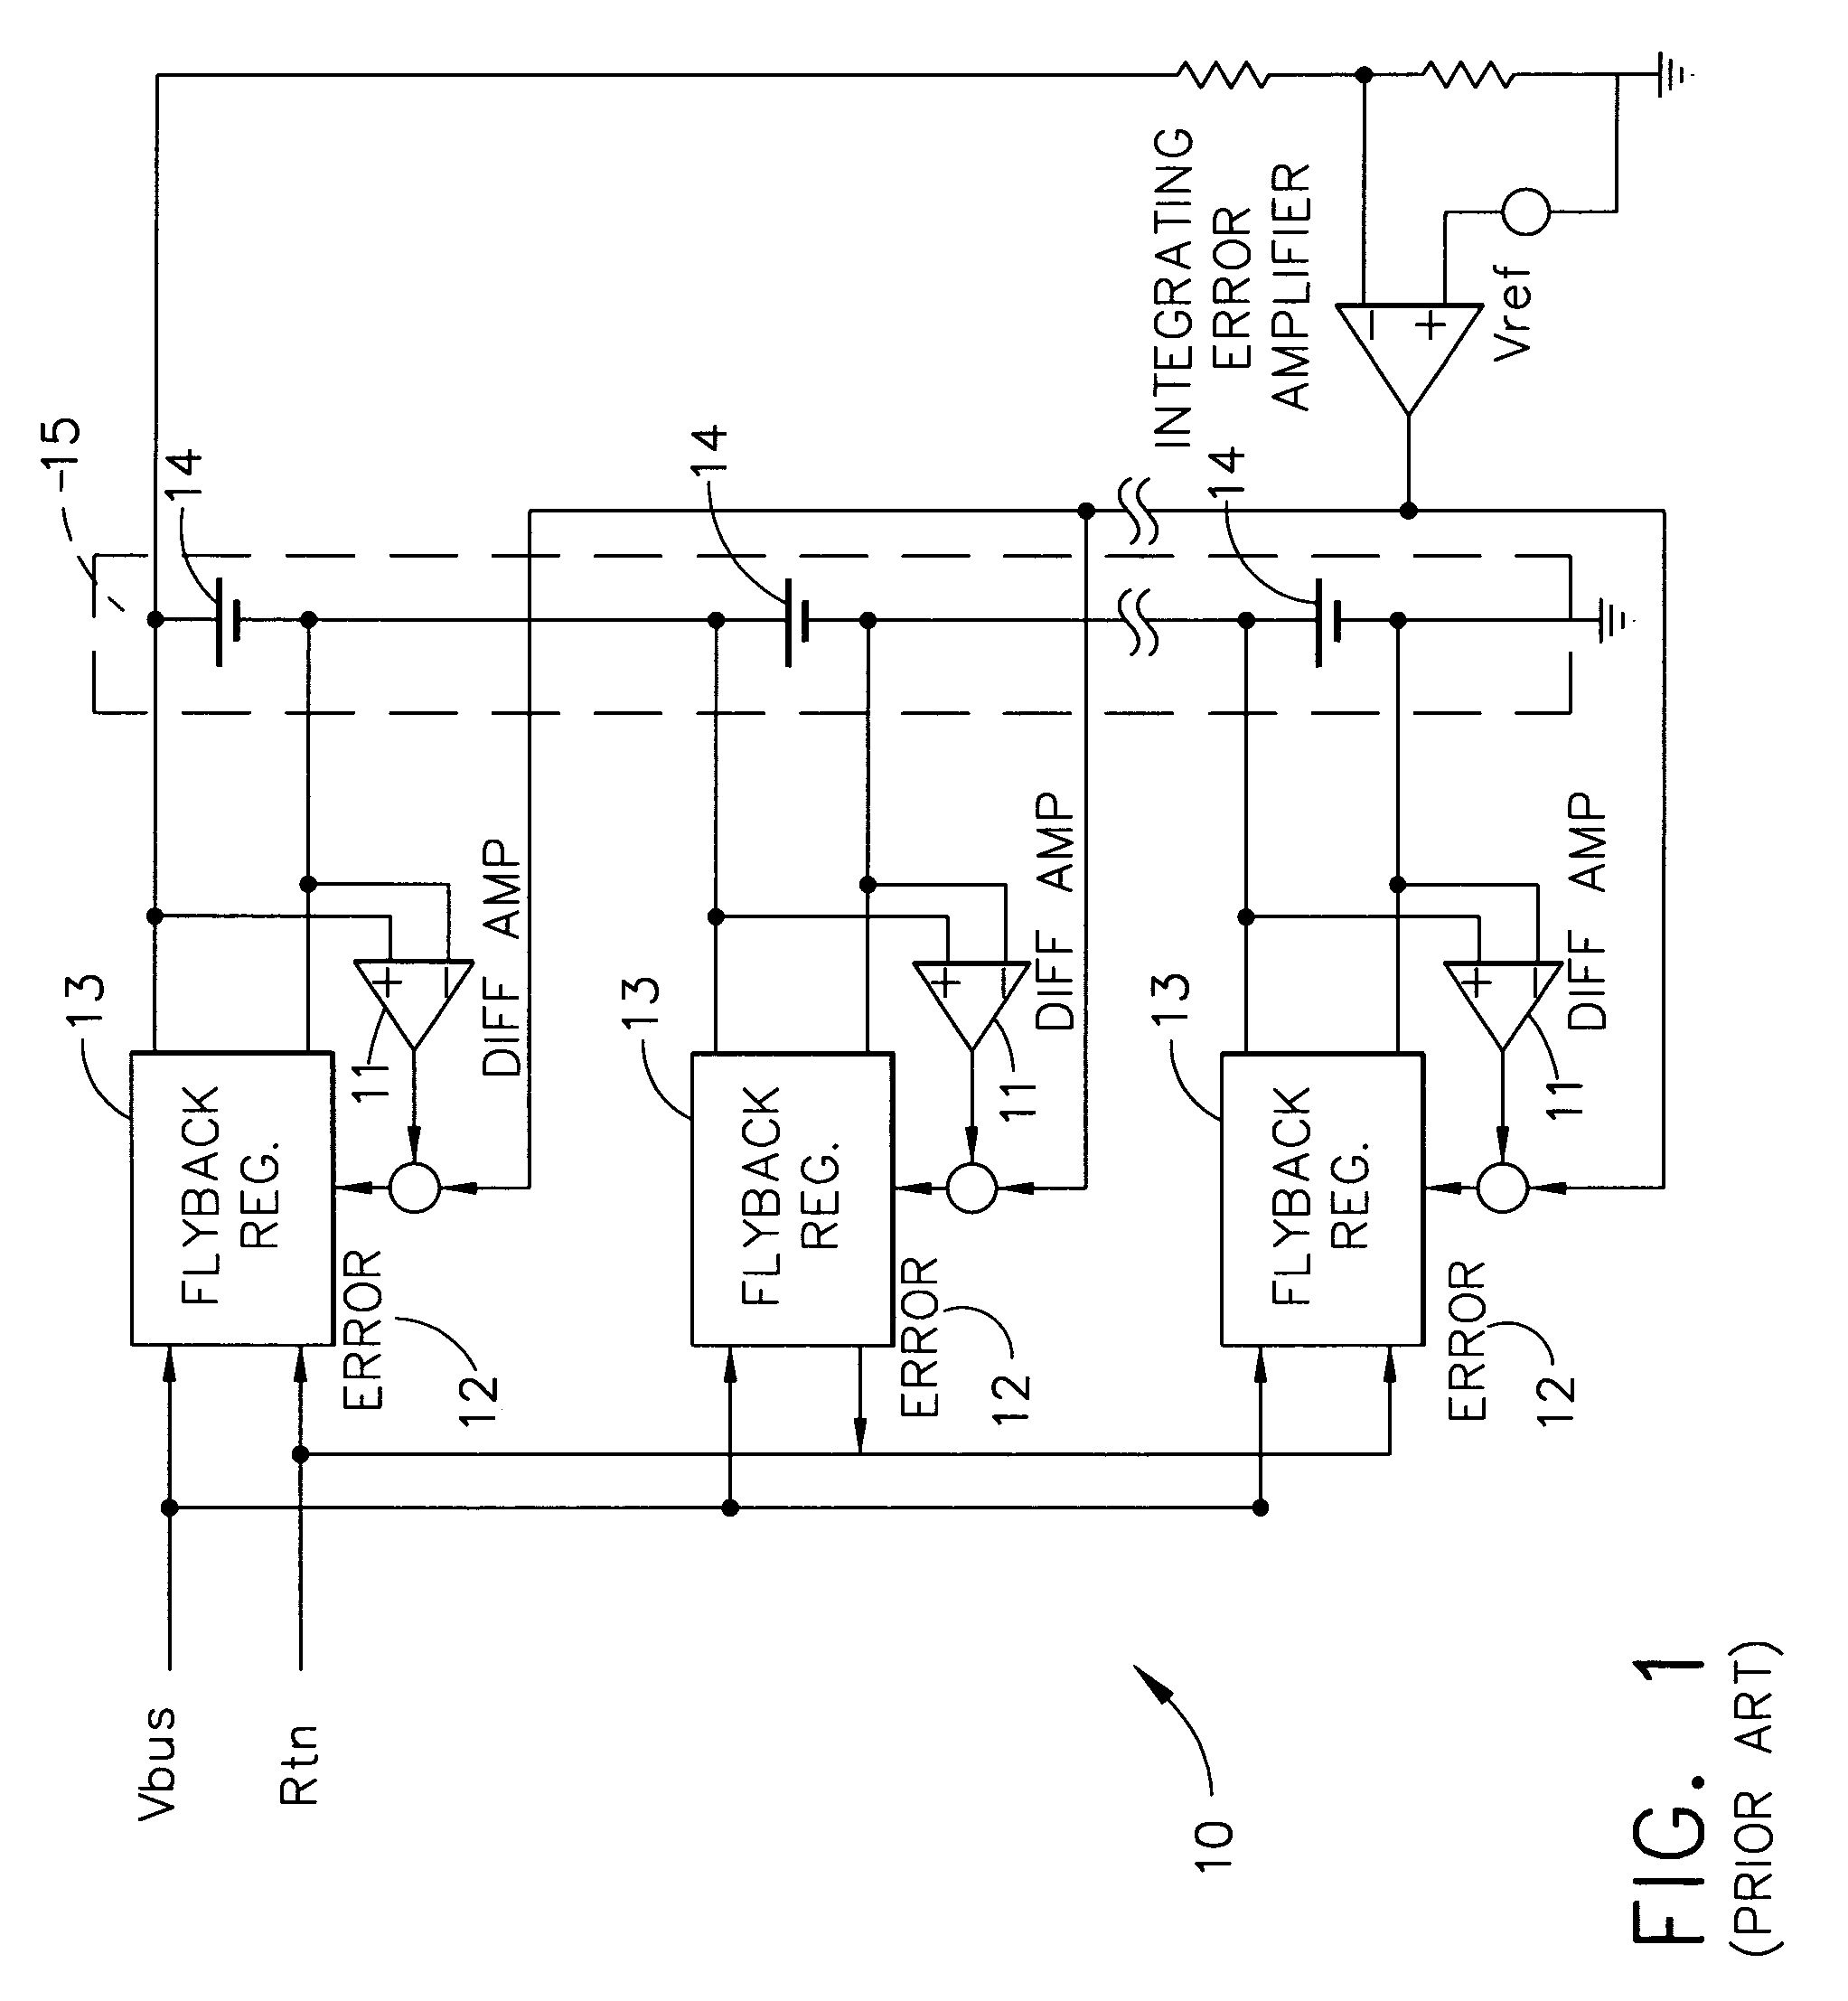 Autonomous battery cell balancing system with integrated voltage monitoring